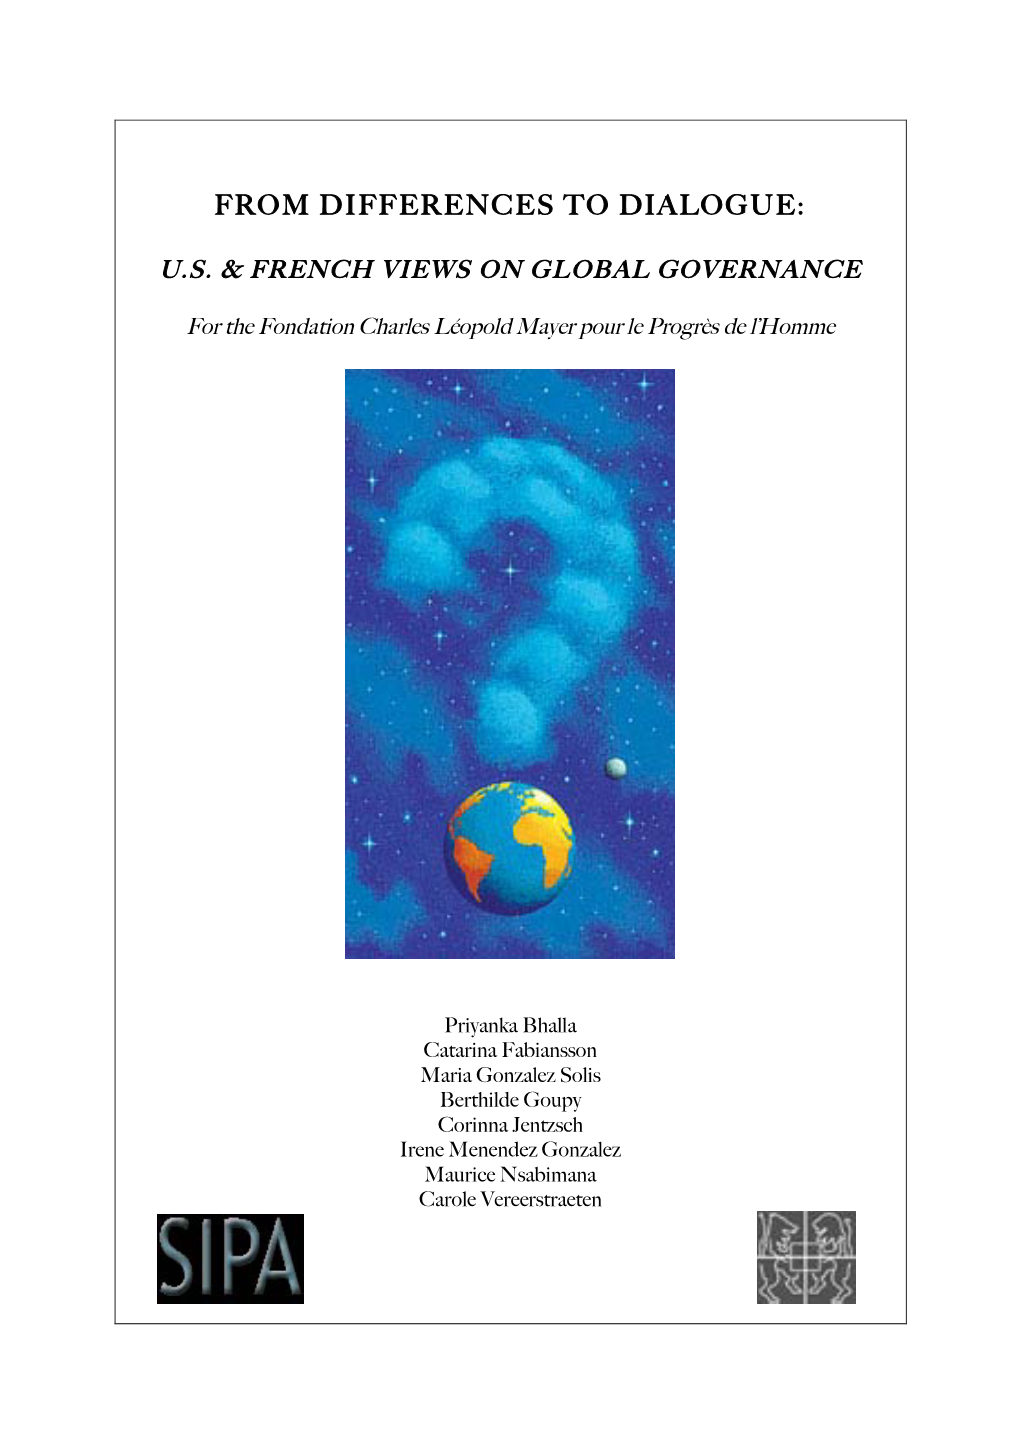 US and French Perspectives on Global Governance